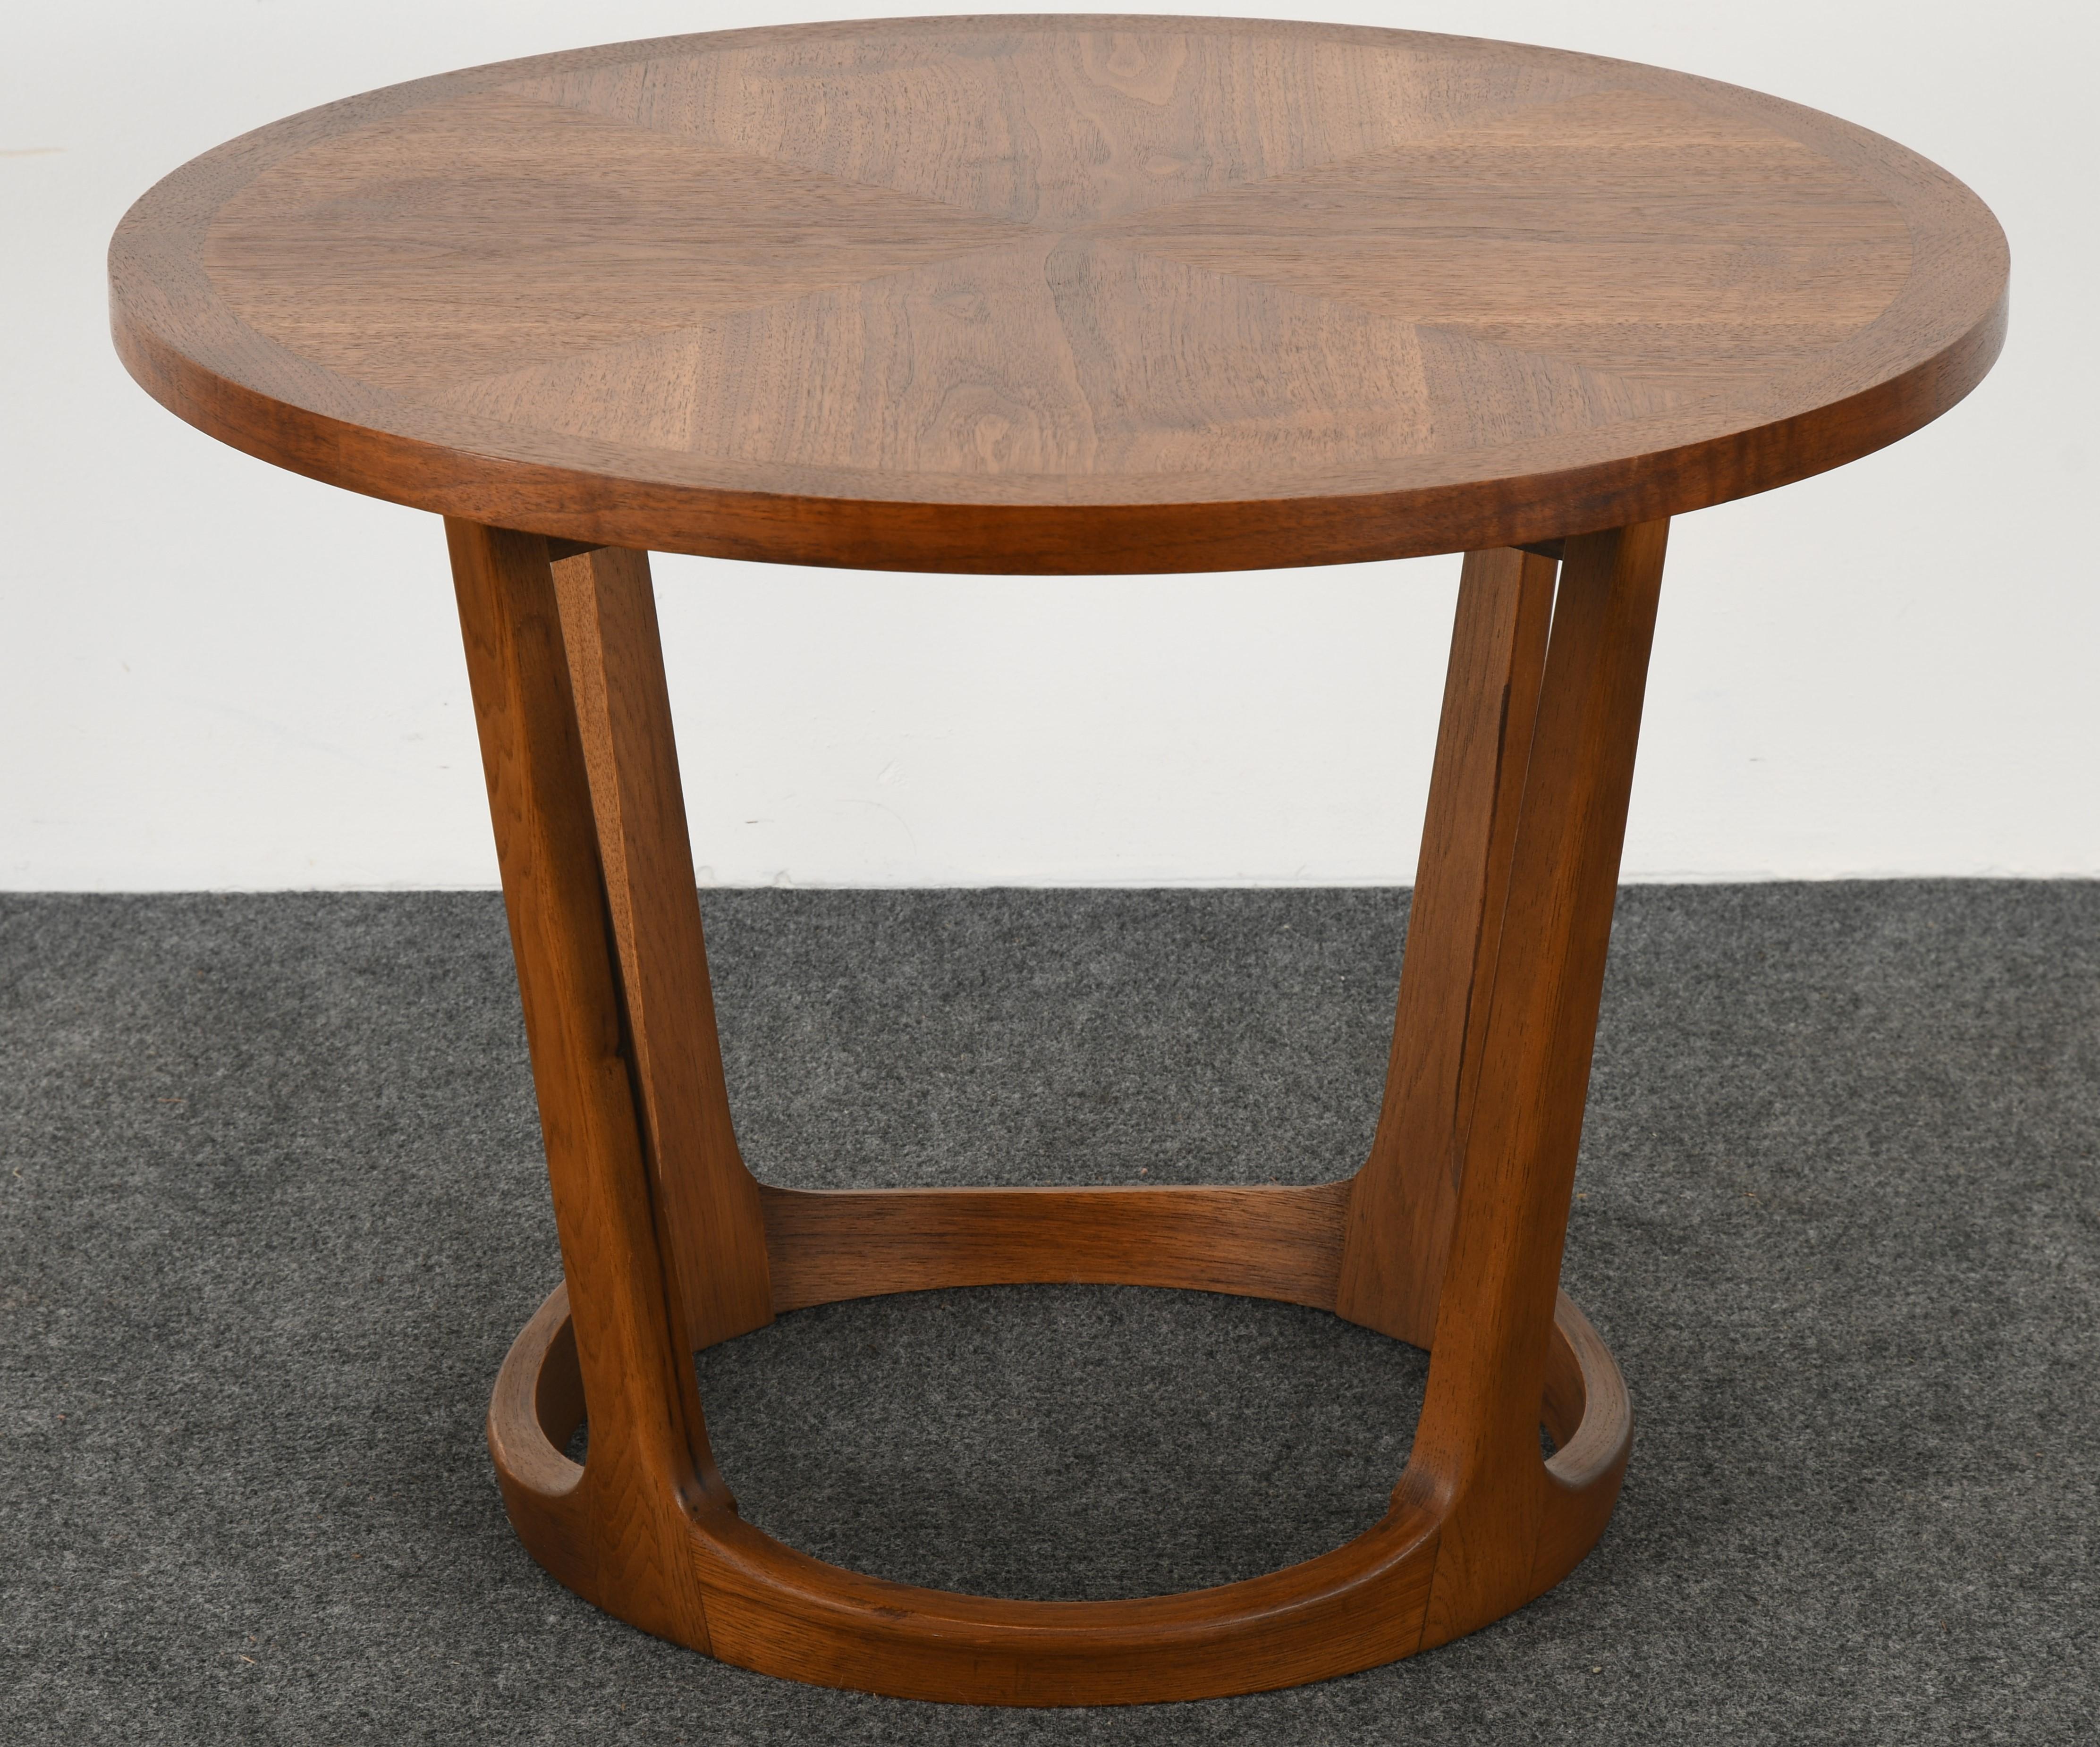 A modernist table by Lane Furniture Company in walnut style number 997-22. This is a great table from the Lane 